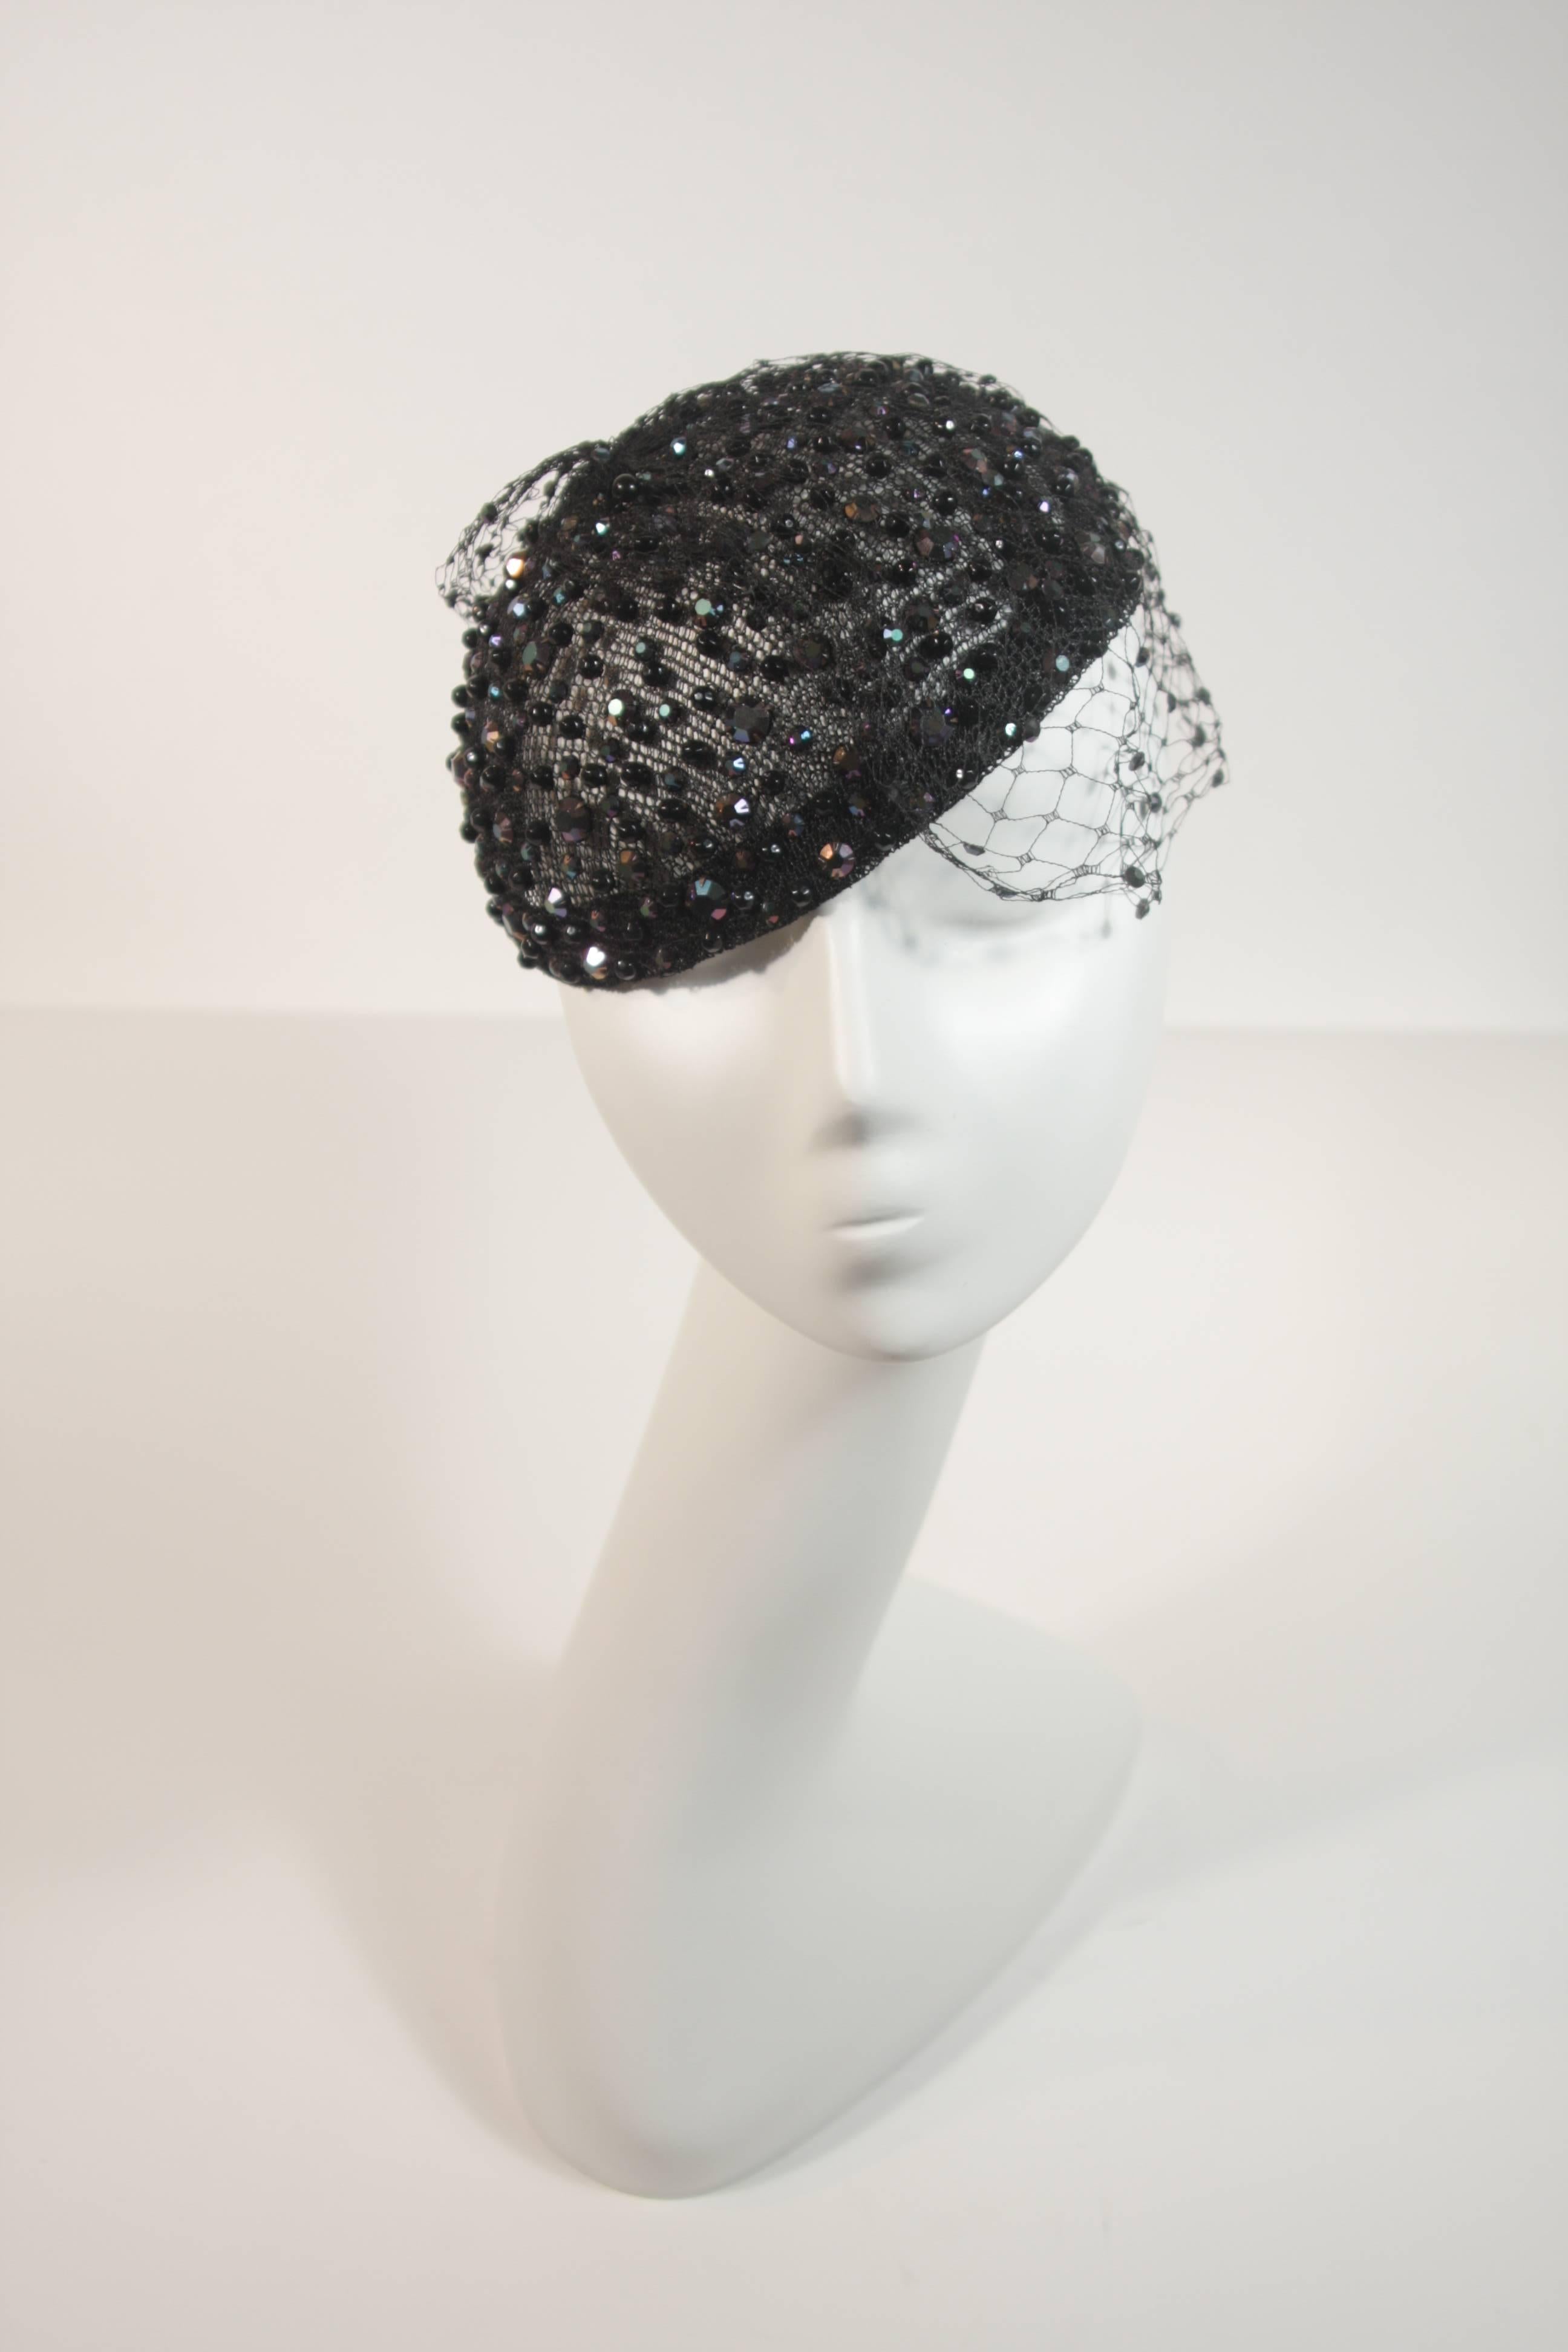 This Frank Olive hat is composed of a black mesh, with netting, and features rhinestones throughout. In excellent condition.

  **Please cross-reference measurements for personal accuracy. 

Measurements (Approximately)  
Circumference: